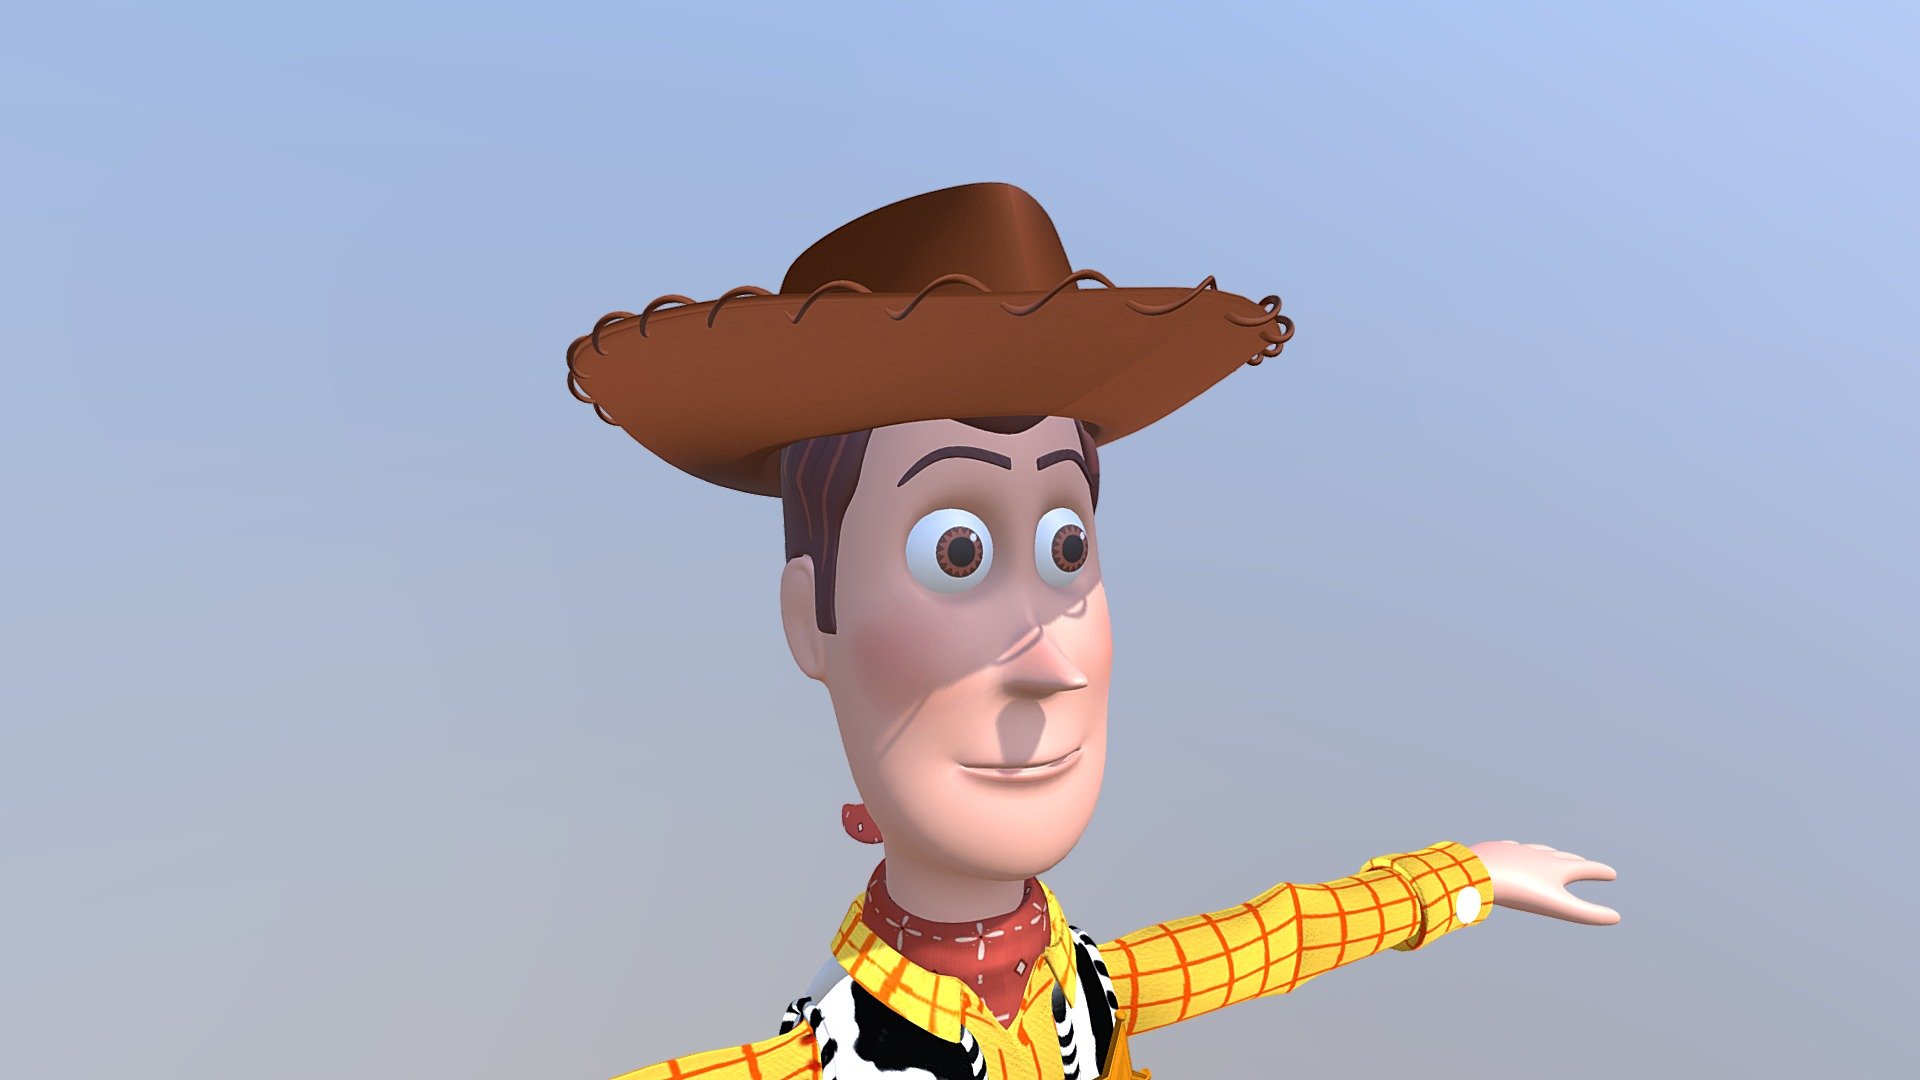 This was a work made just for fun! Hope you like it, feel free to leave any comments so i can improve my work. Than you! - Woody Pride - 3D model by rrVillegas 3d model